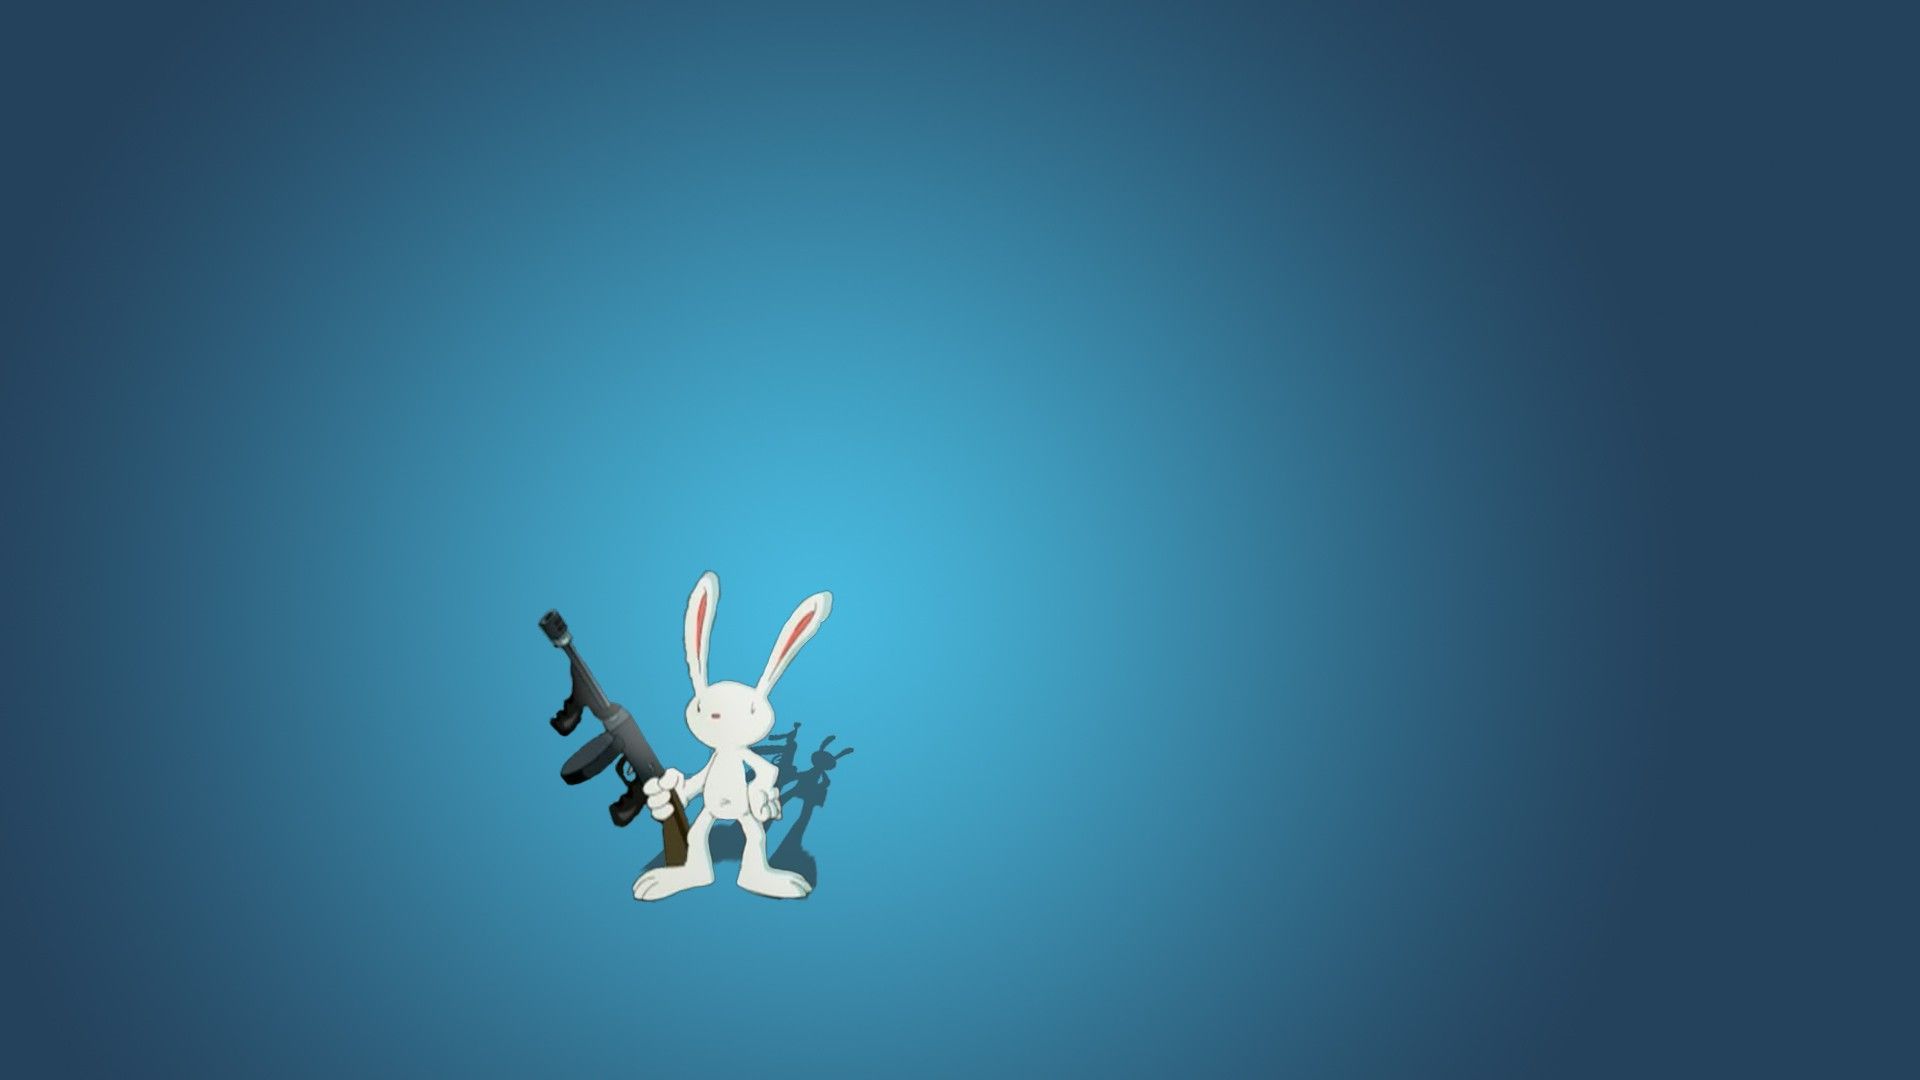 Sam and Max Tomb Wallpaper by Maleficent84 on DeviantArt